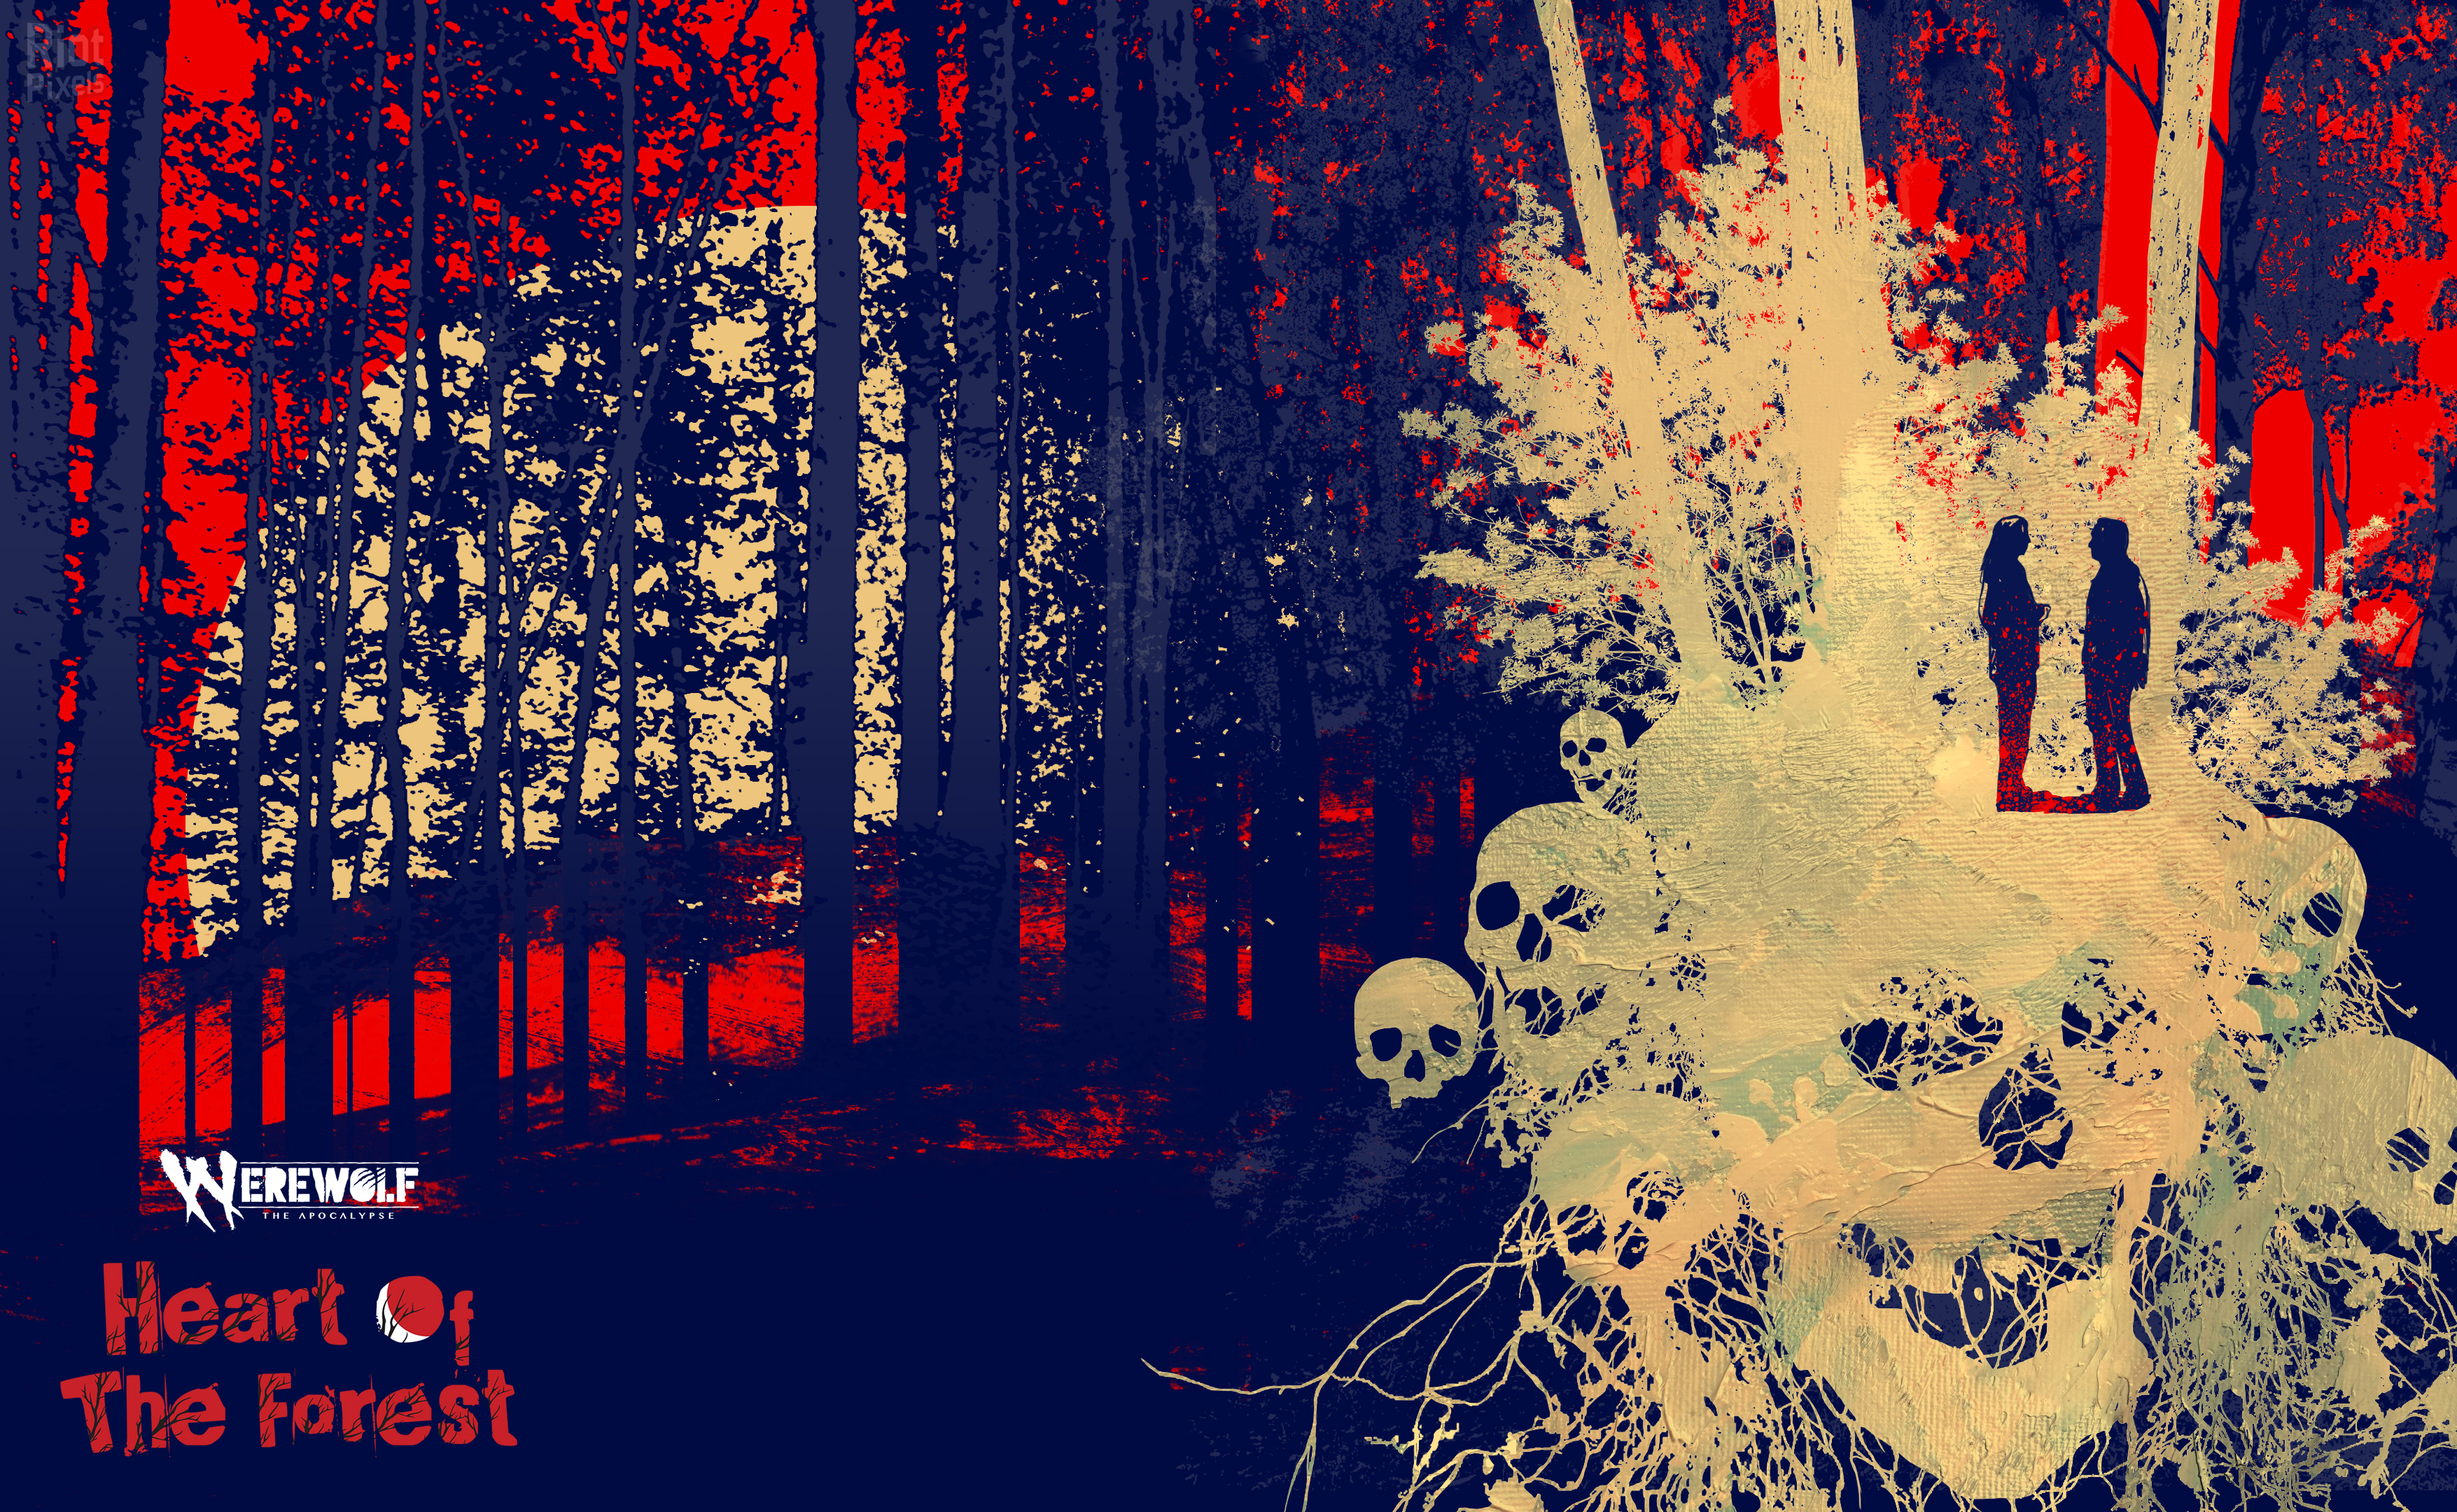 Werewolf: The Apocalypse of the Forest wallpaper at Riot Pixels, image